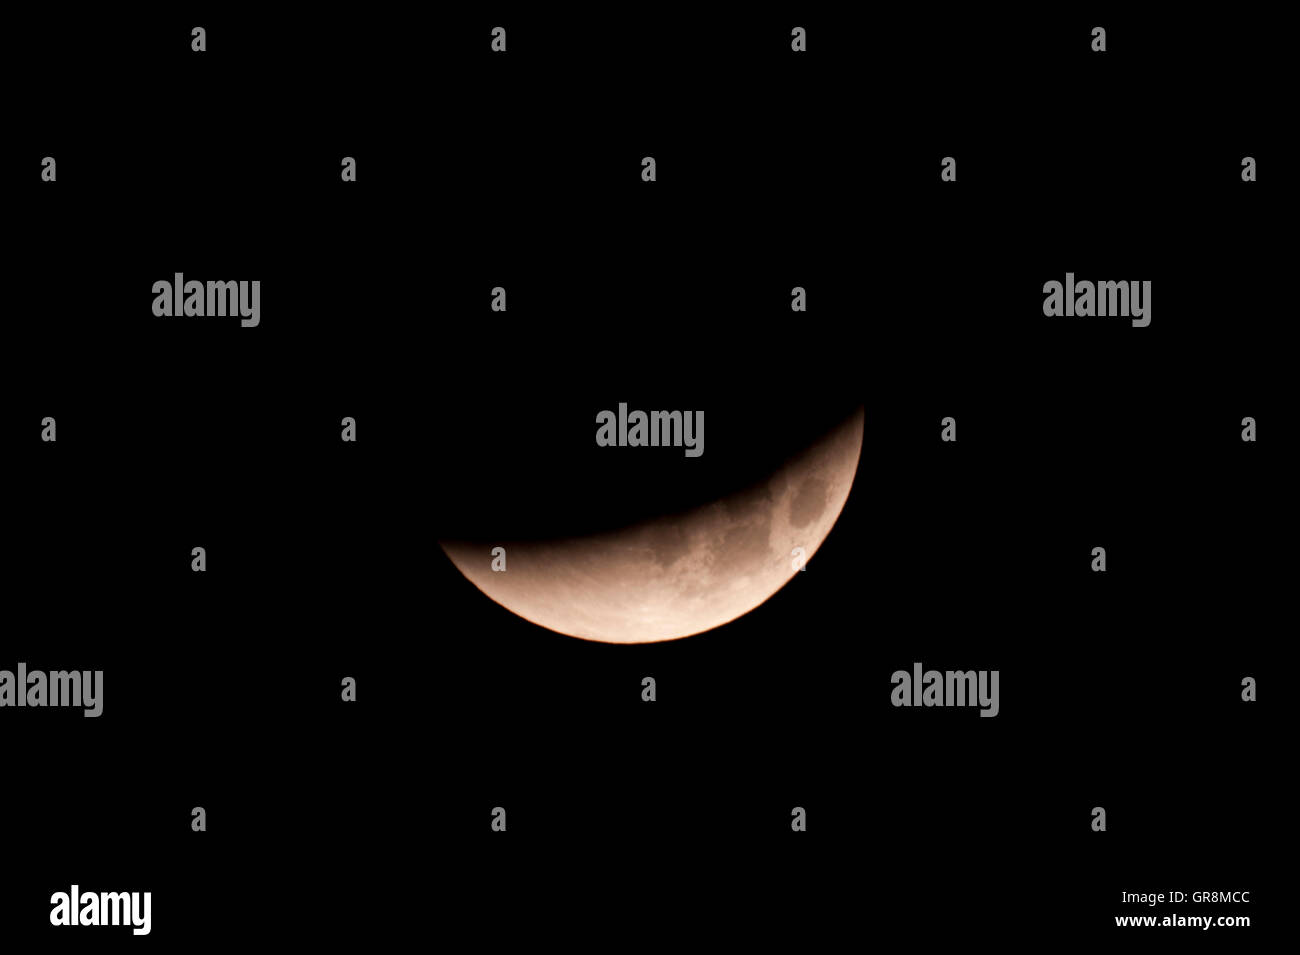 Total Lunar Eclipse On Sept. 28, 2015, Observed In Kiel, Germany, Through A Telescope Stock Photo